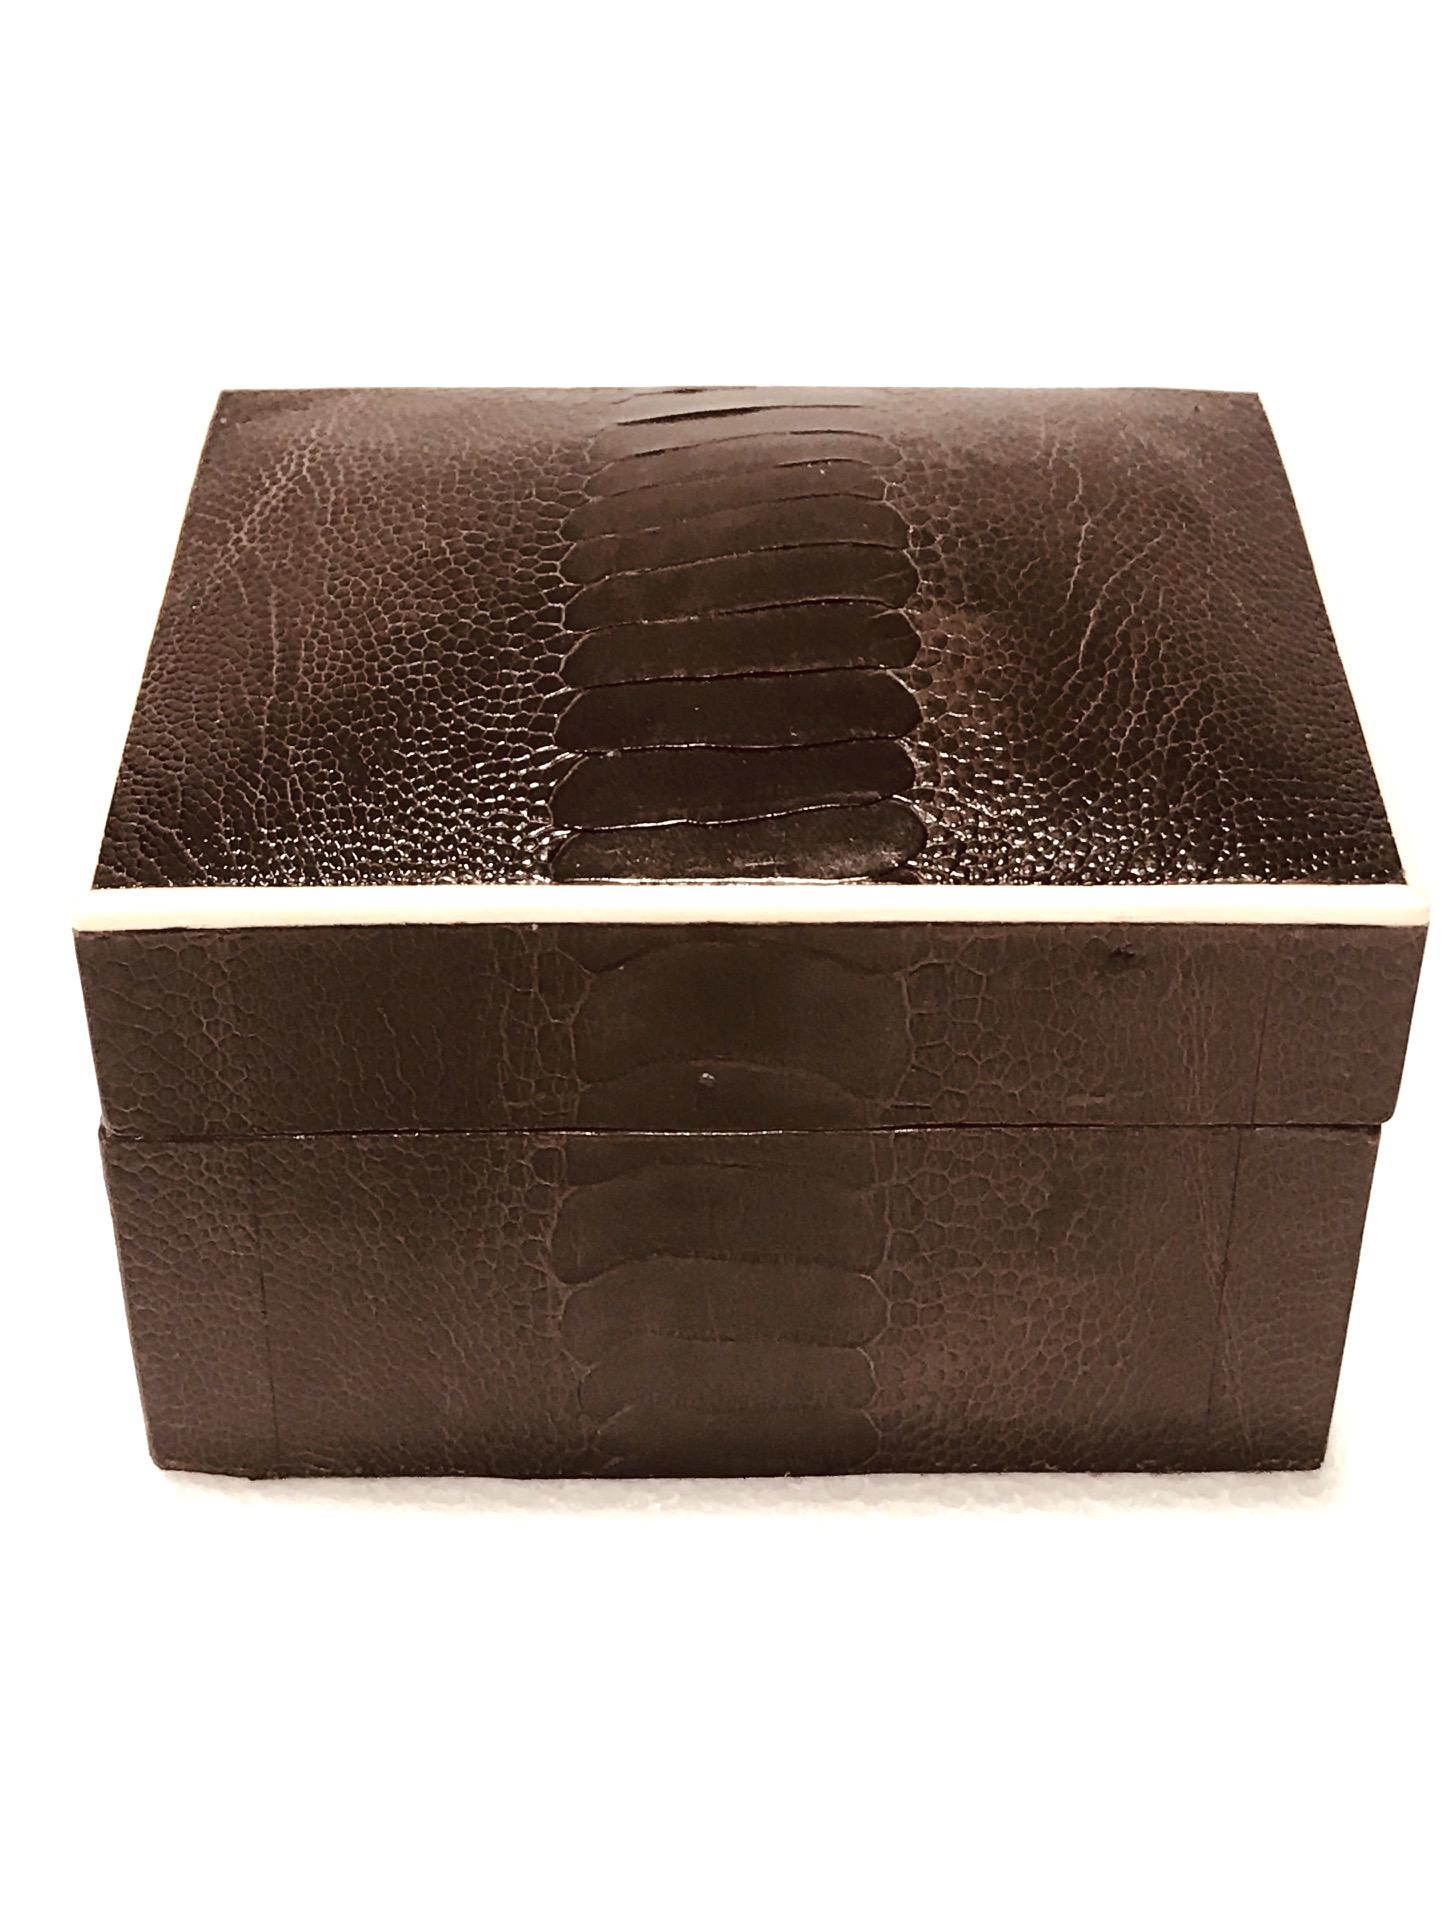 French Vintage R&Y Augousti Decorative Box in Brown Ostrich Leather and Bone, c. 2000